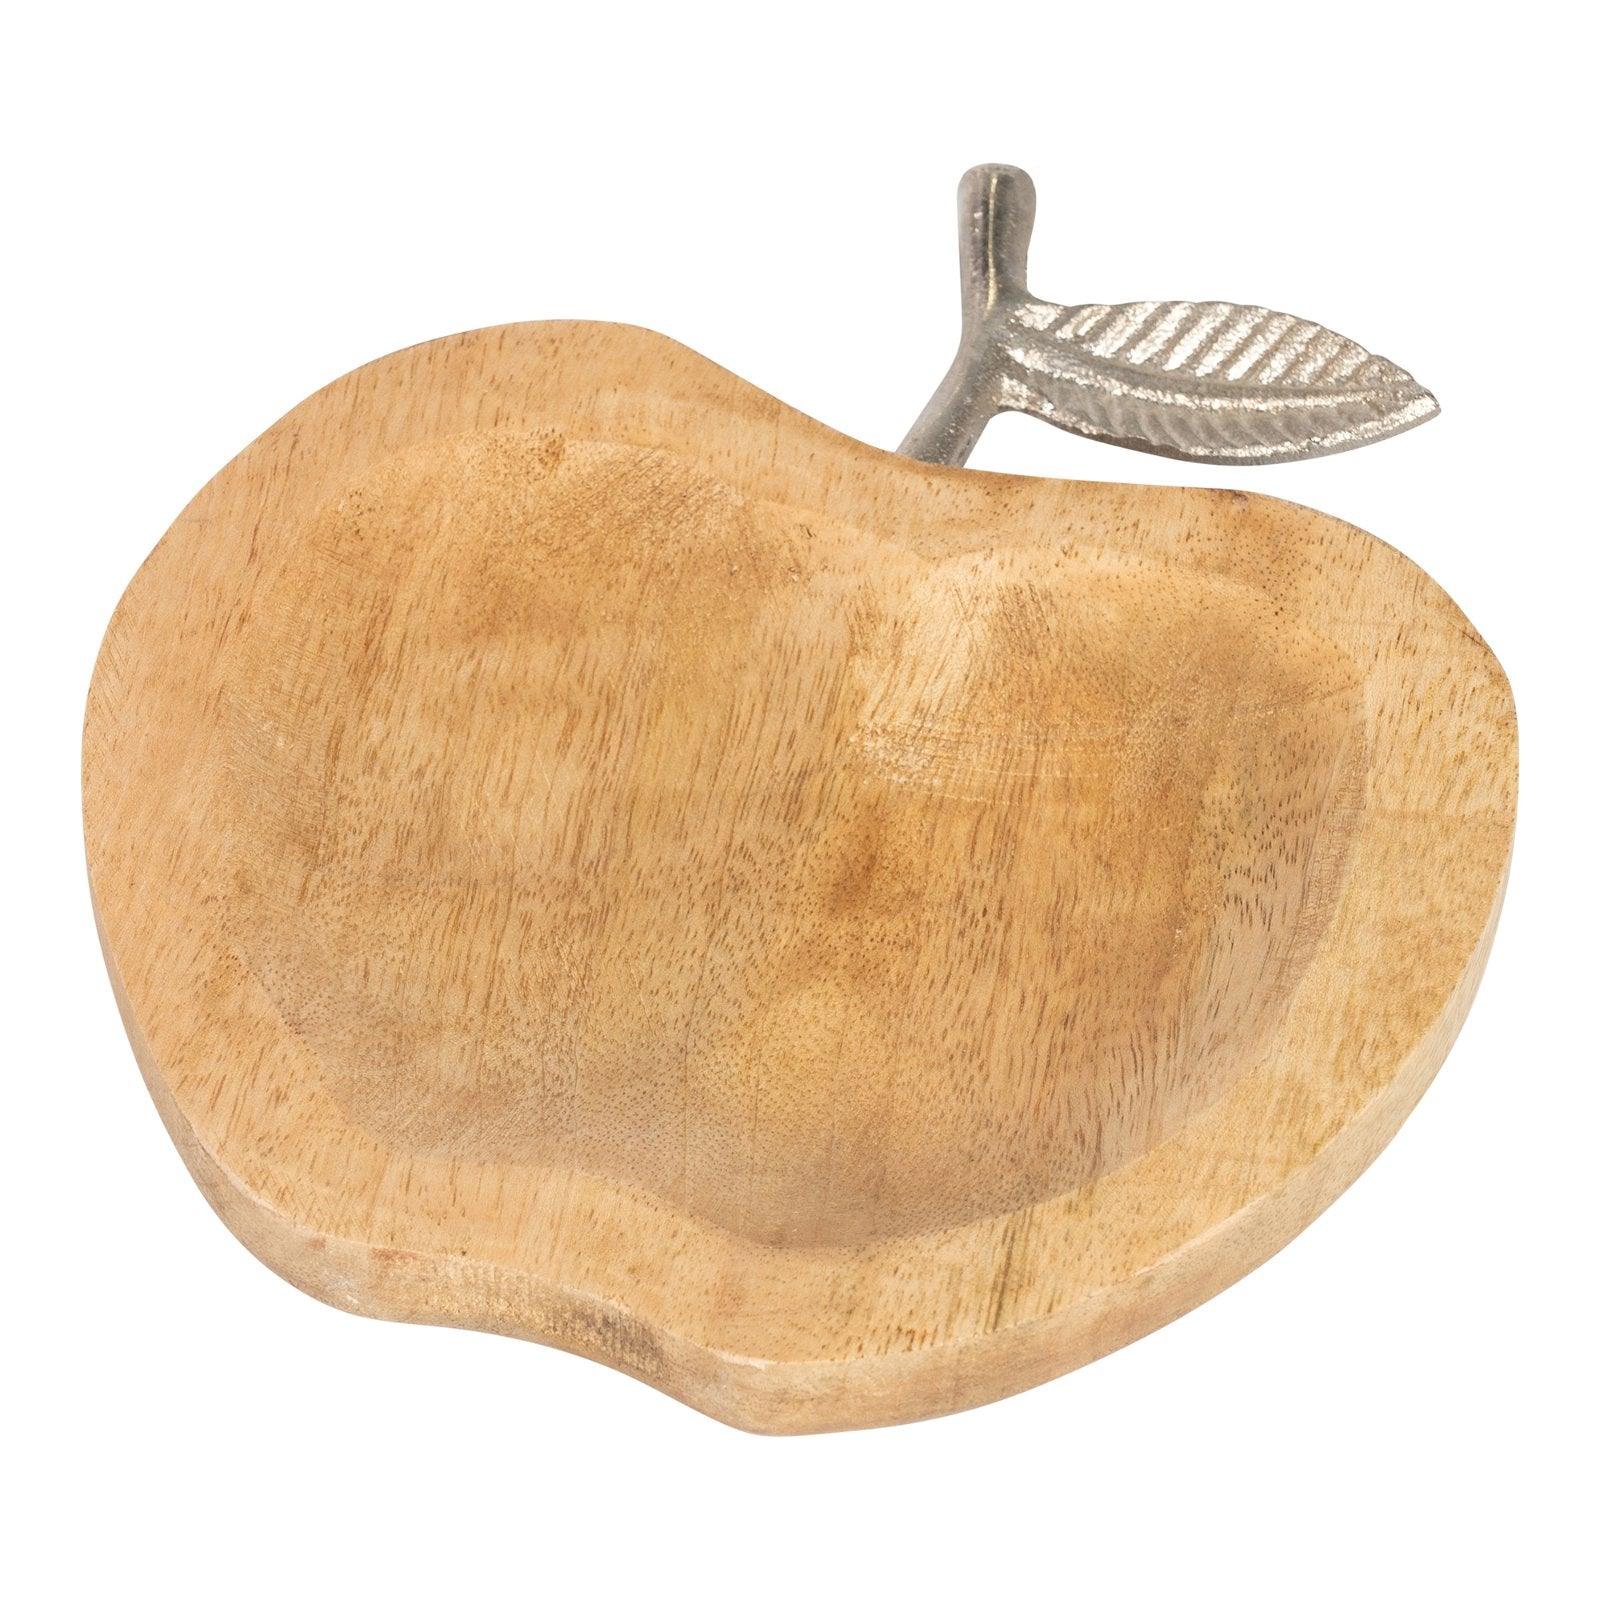 Wooden Apple Designed Tray with Silver Leaf - Large-Trays & Chopping Boards